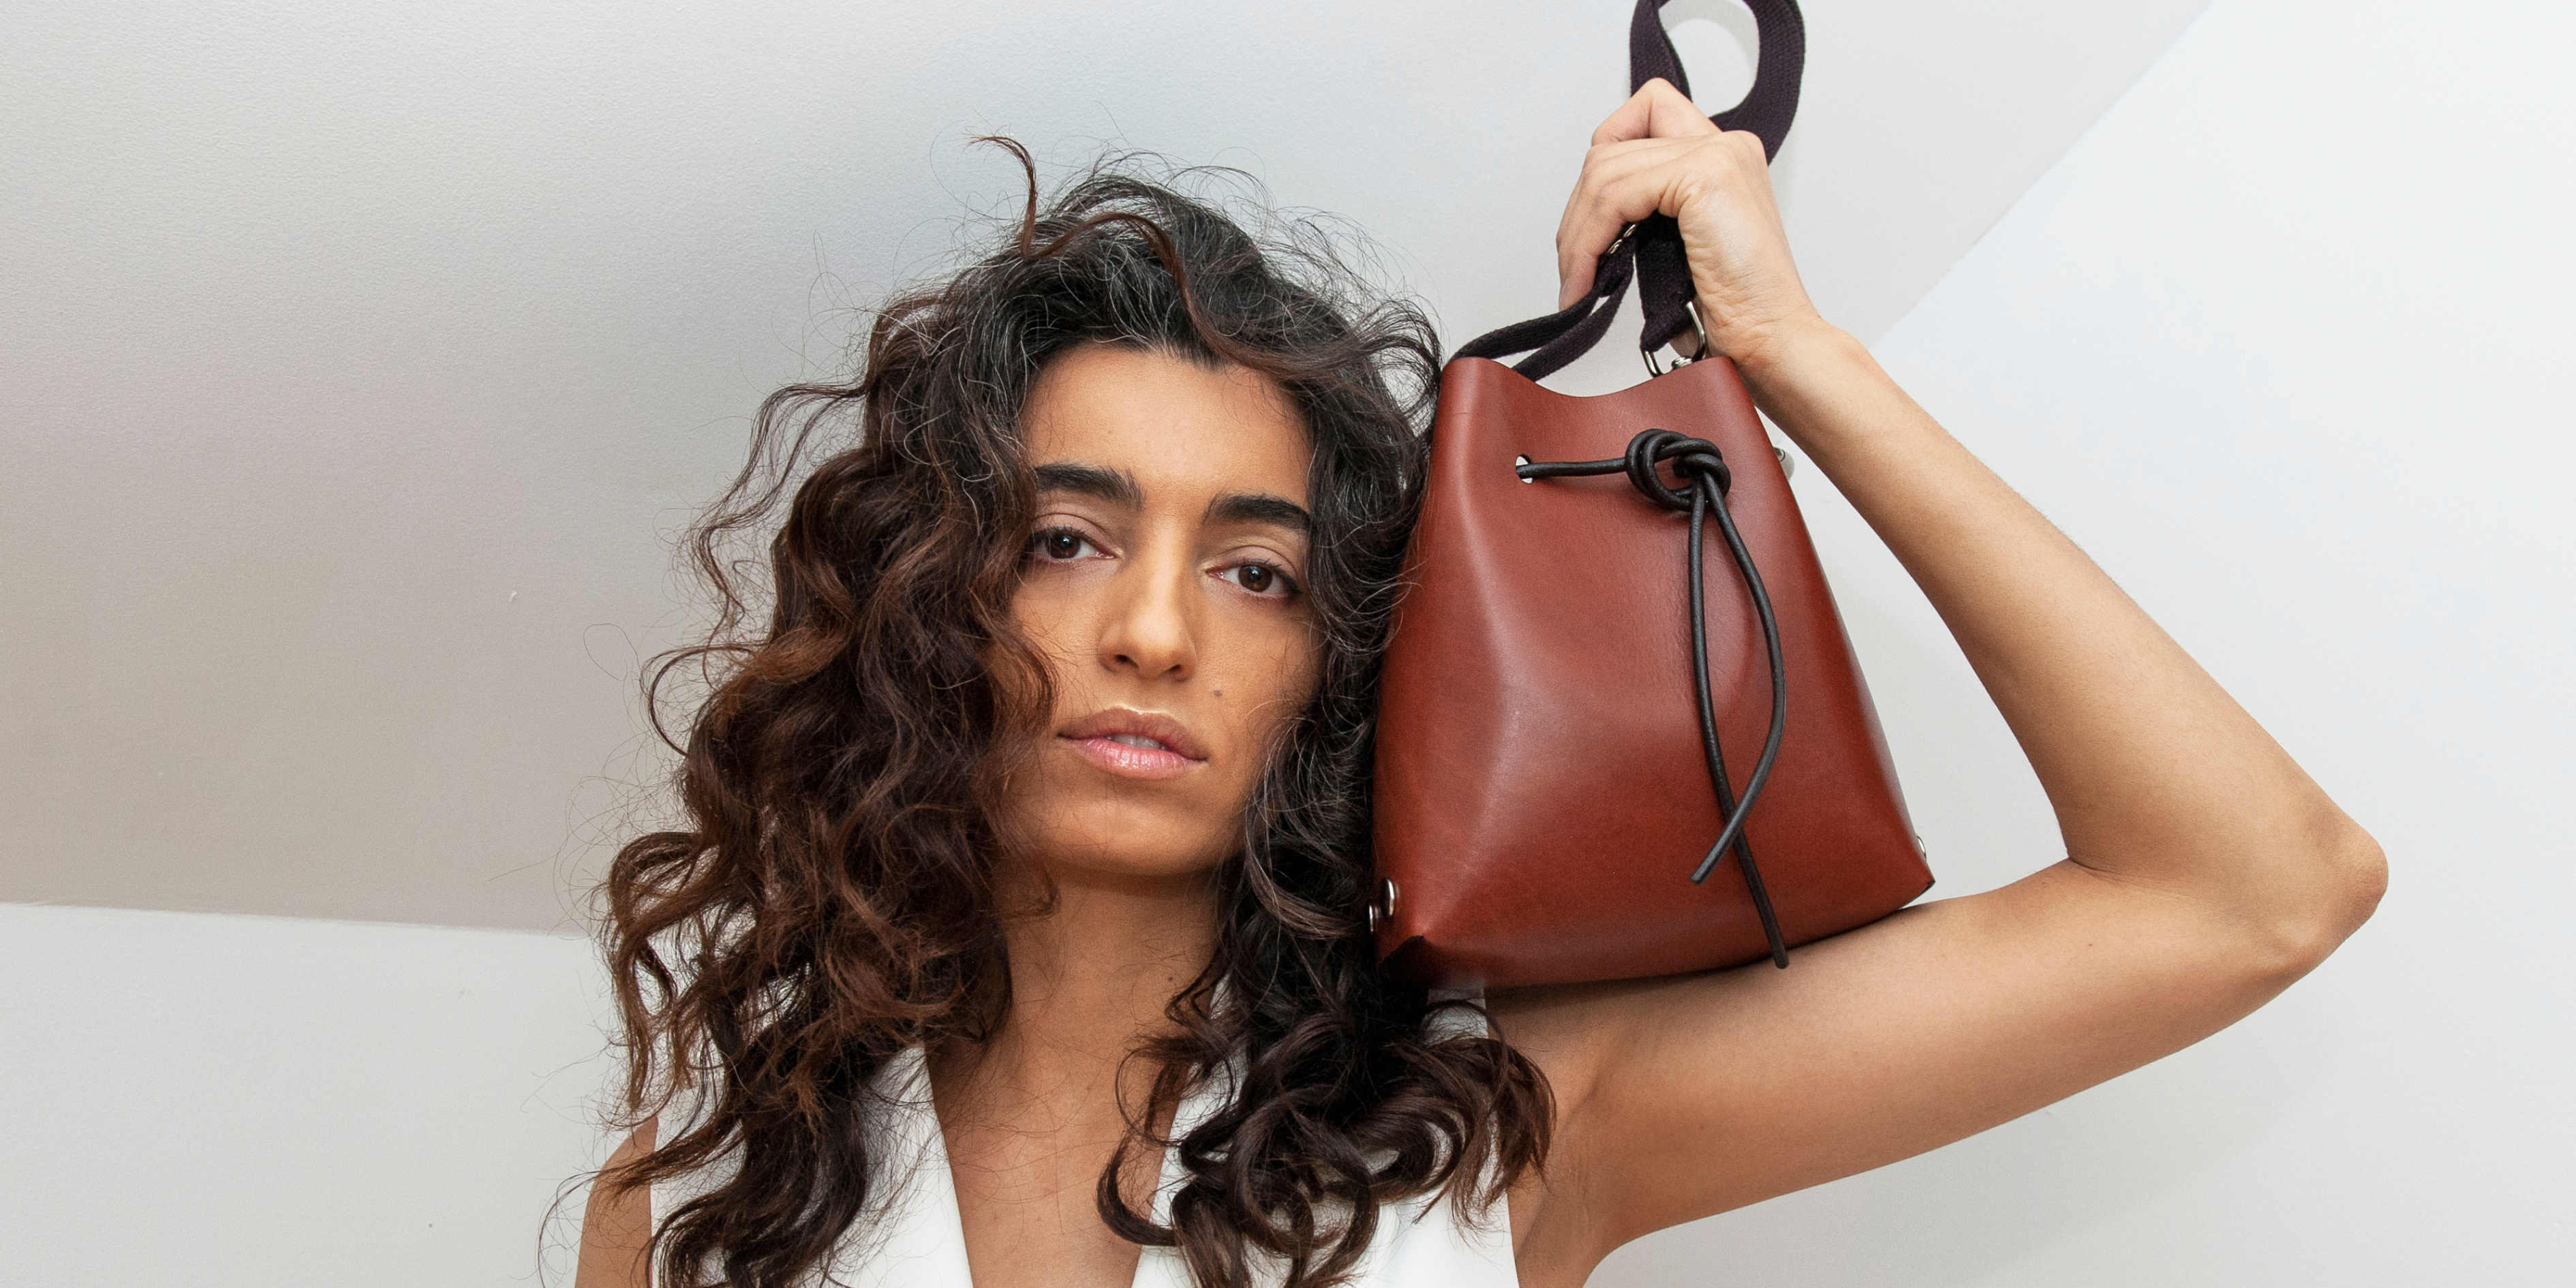 WHY A BUCKET BAG IS A HANDY INVESTMENT - Inspiring Wit